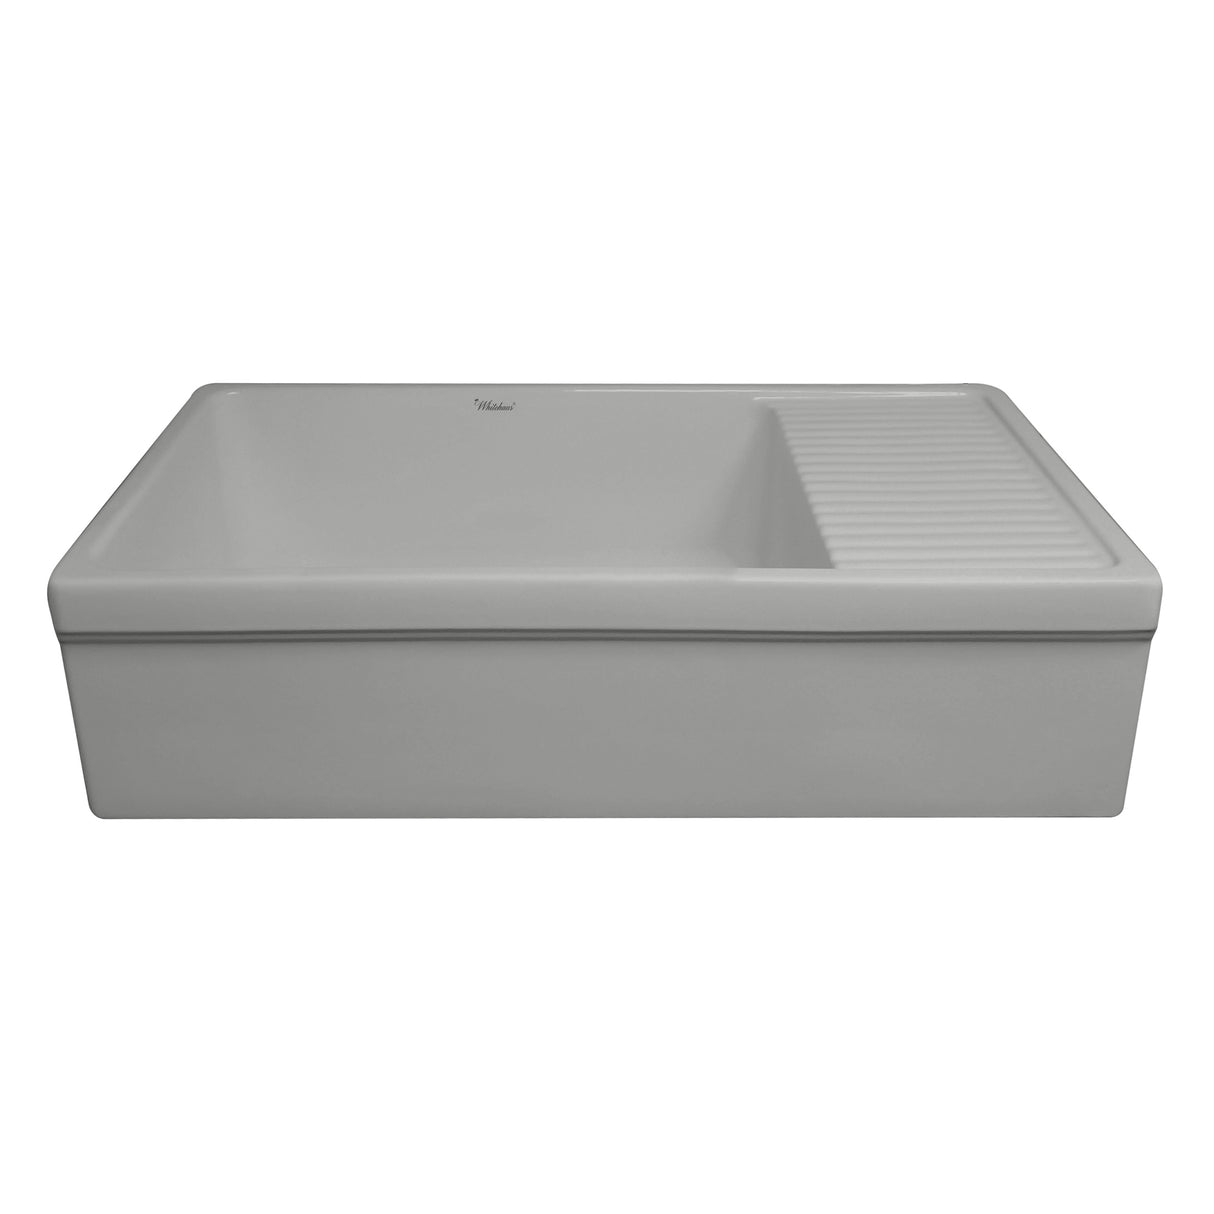 Farmhaus Quatro Alcove Large Reversible Matte Fireclay Kitchen Sink with  Integral Drainboard and a Decorative 2 ½" Lip Front Apron on Both Sides